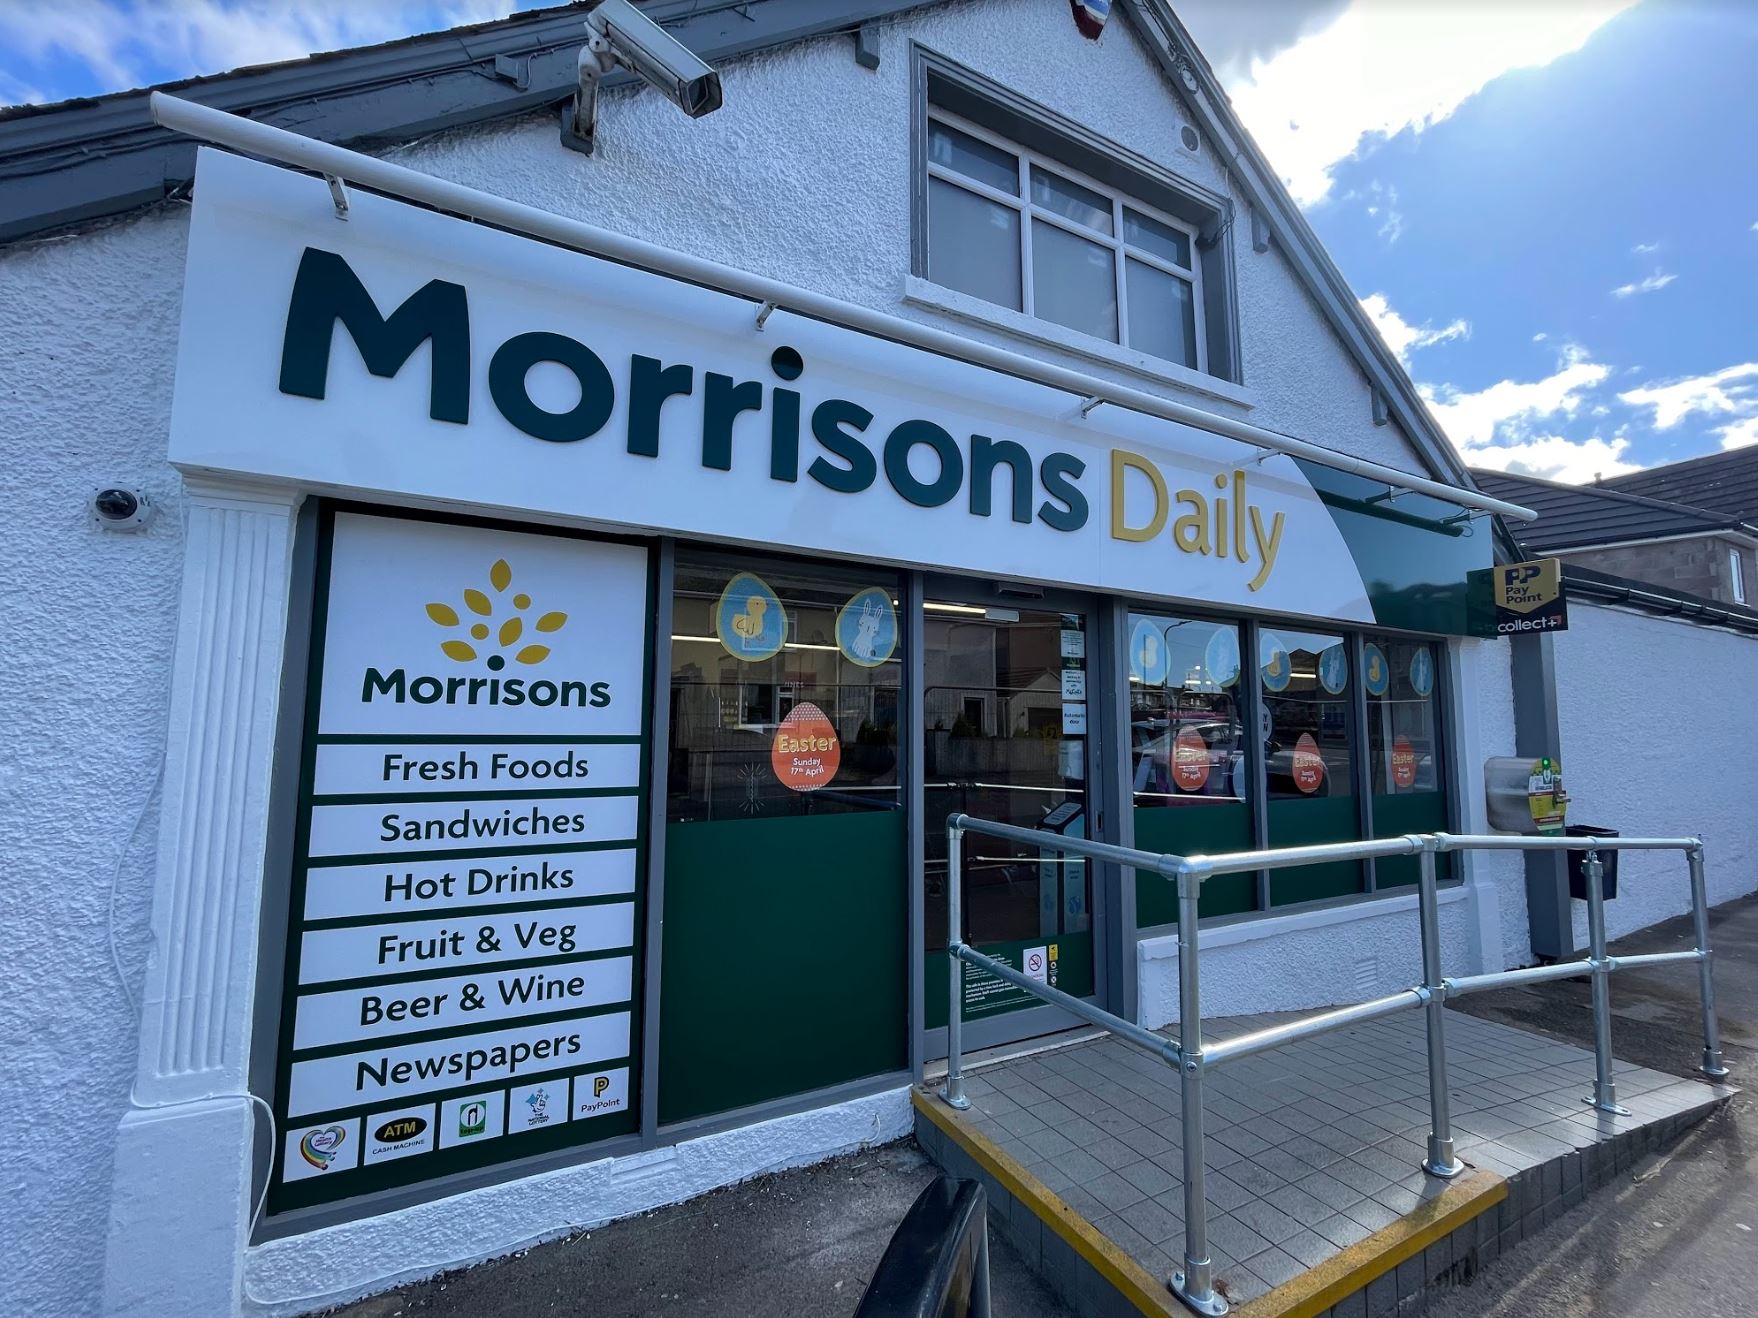 Morrisons Daily